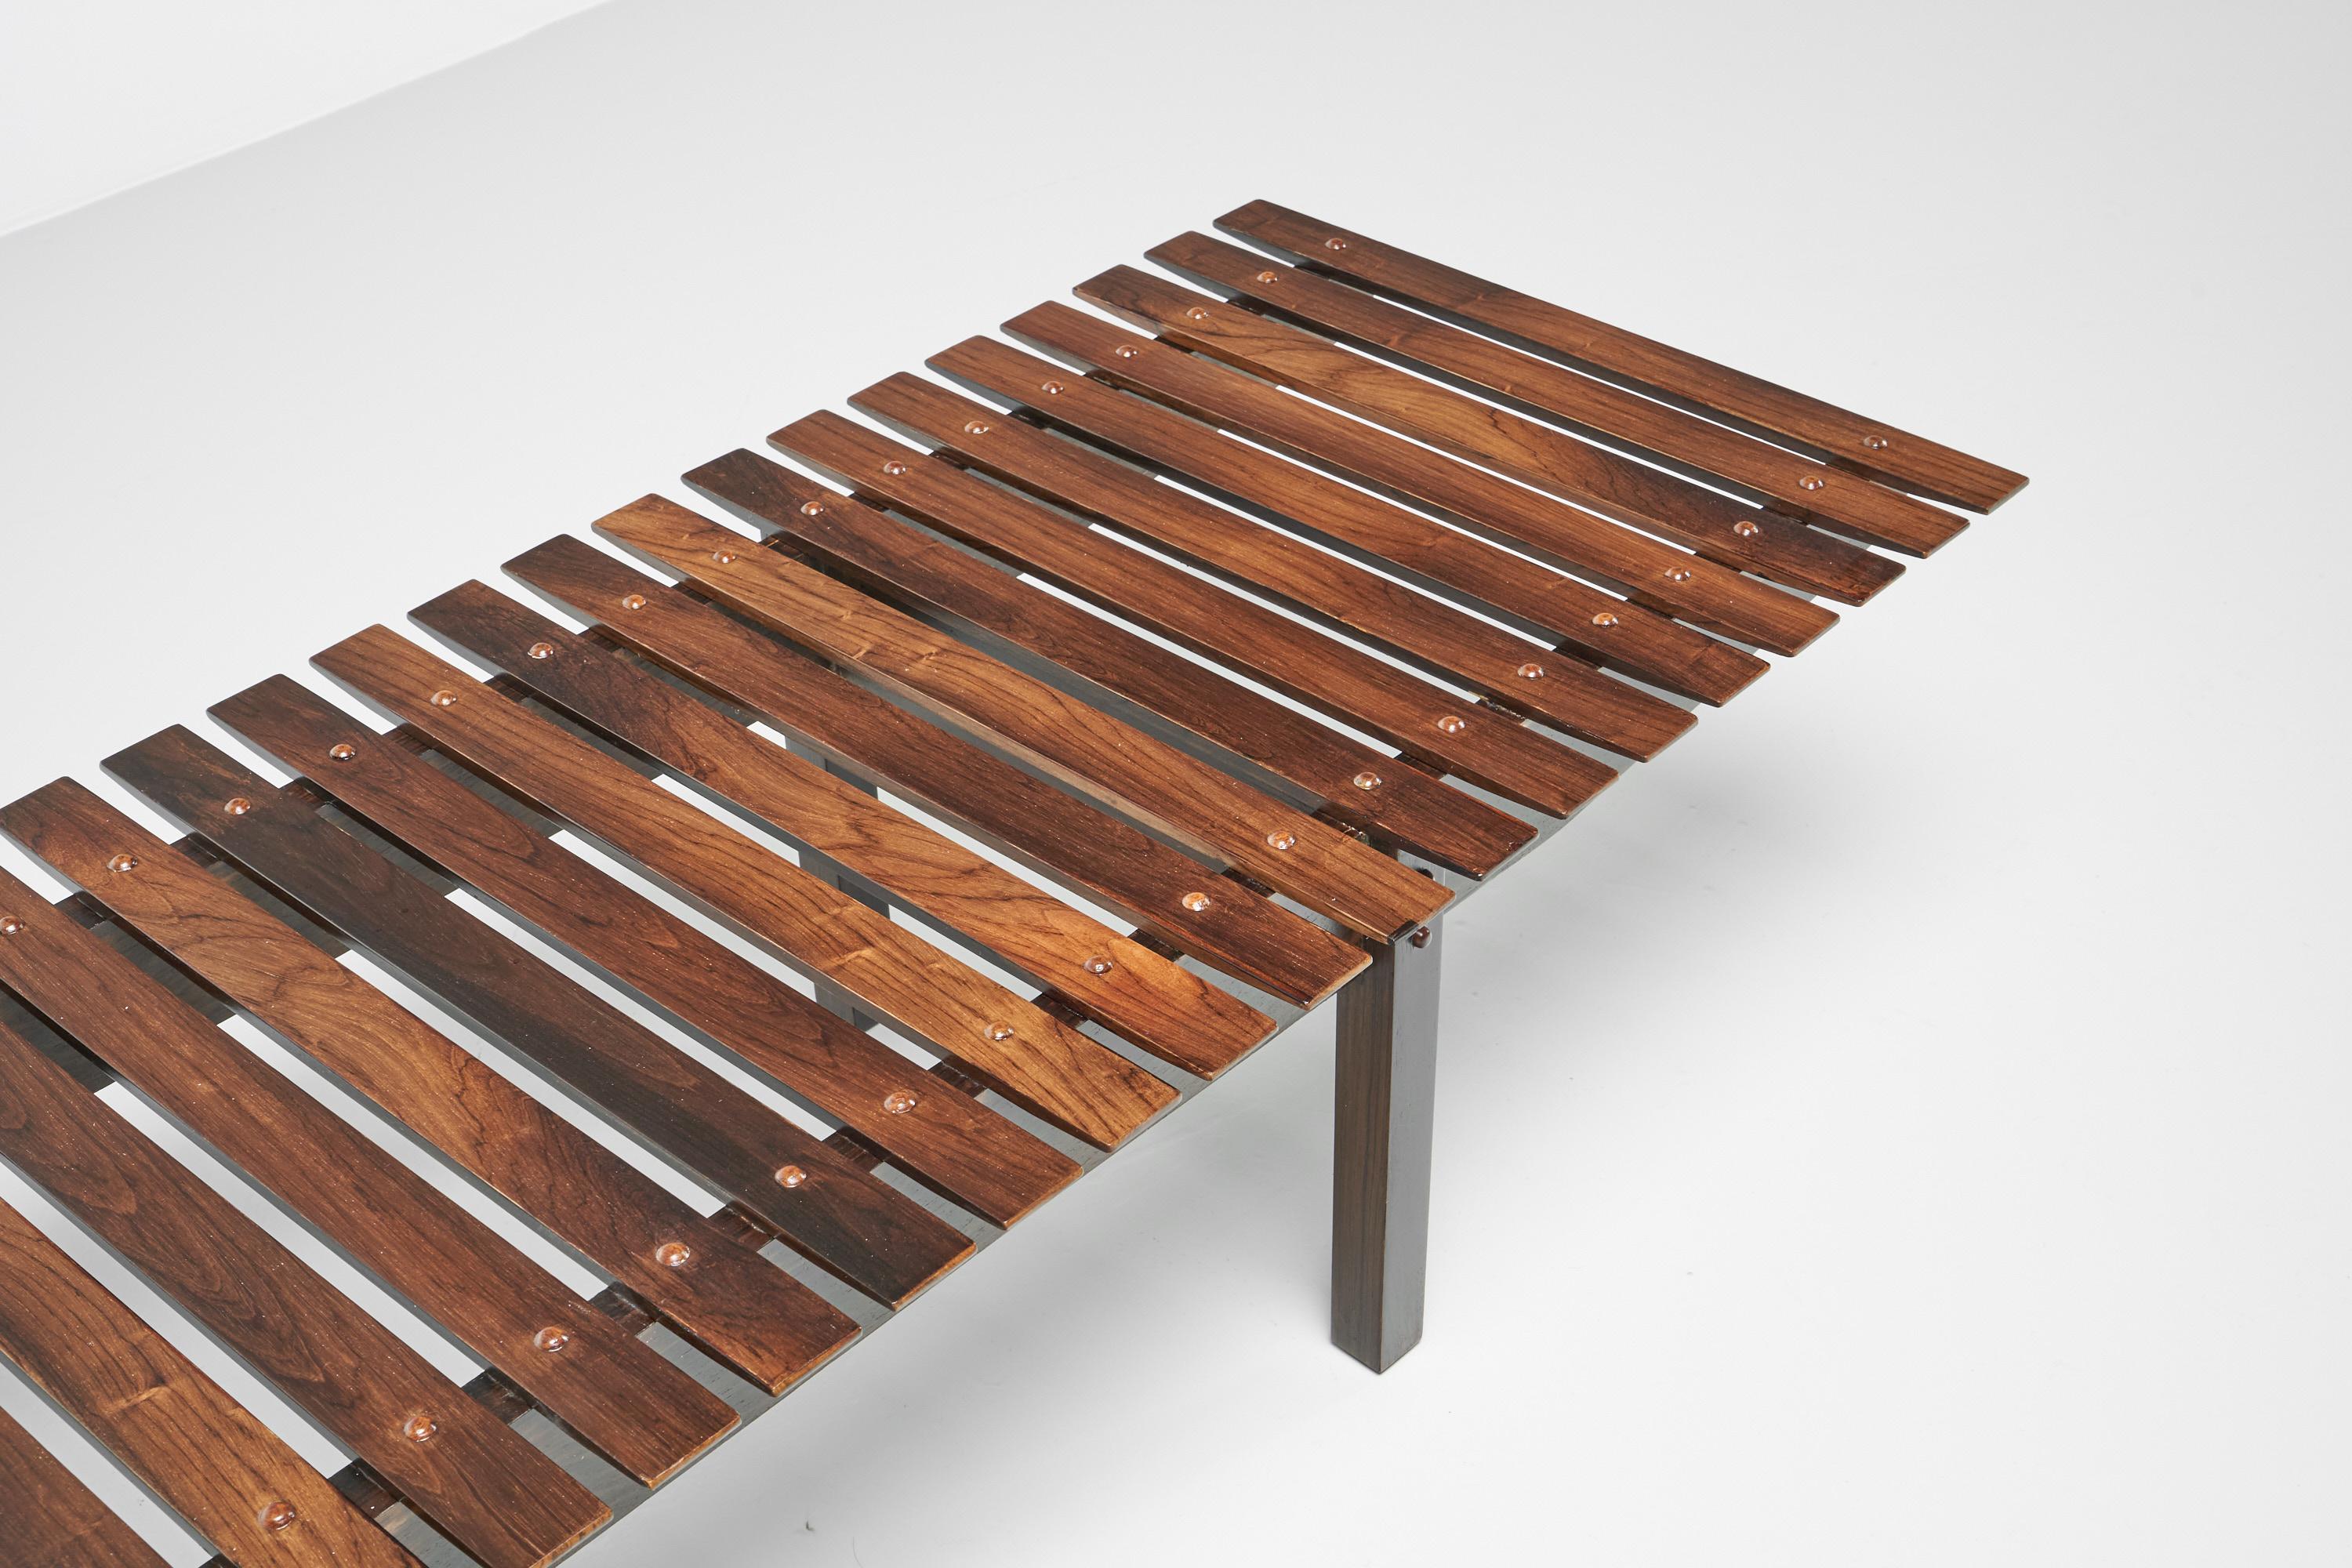 Beautiful and large sized so called 'Mucki' slat bench designed by Sergio Rodrigues and manufactured by Oca, Brazil 1959. This is the largest version made bench of the Mucki series and for me it is the one where the proportions are the nicest. It